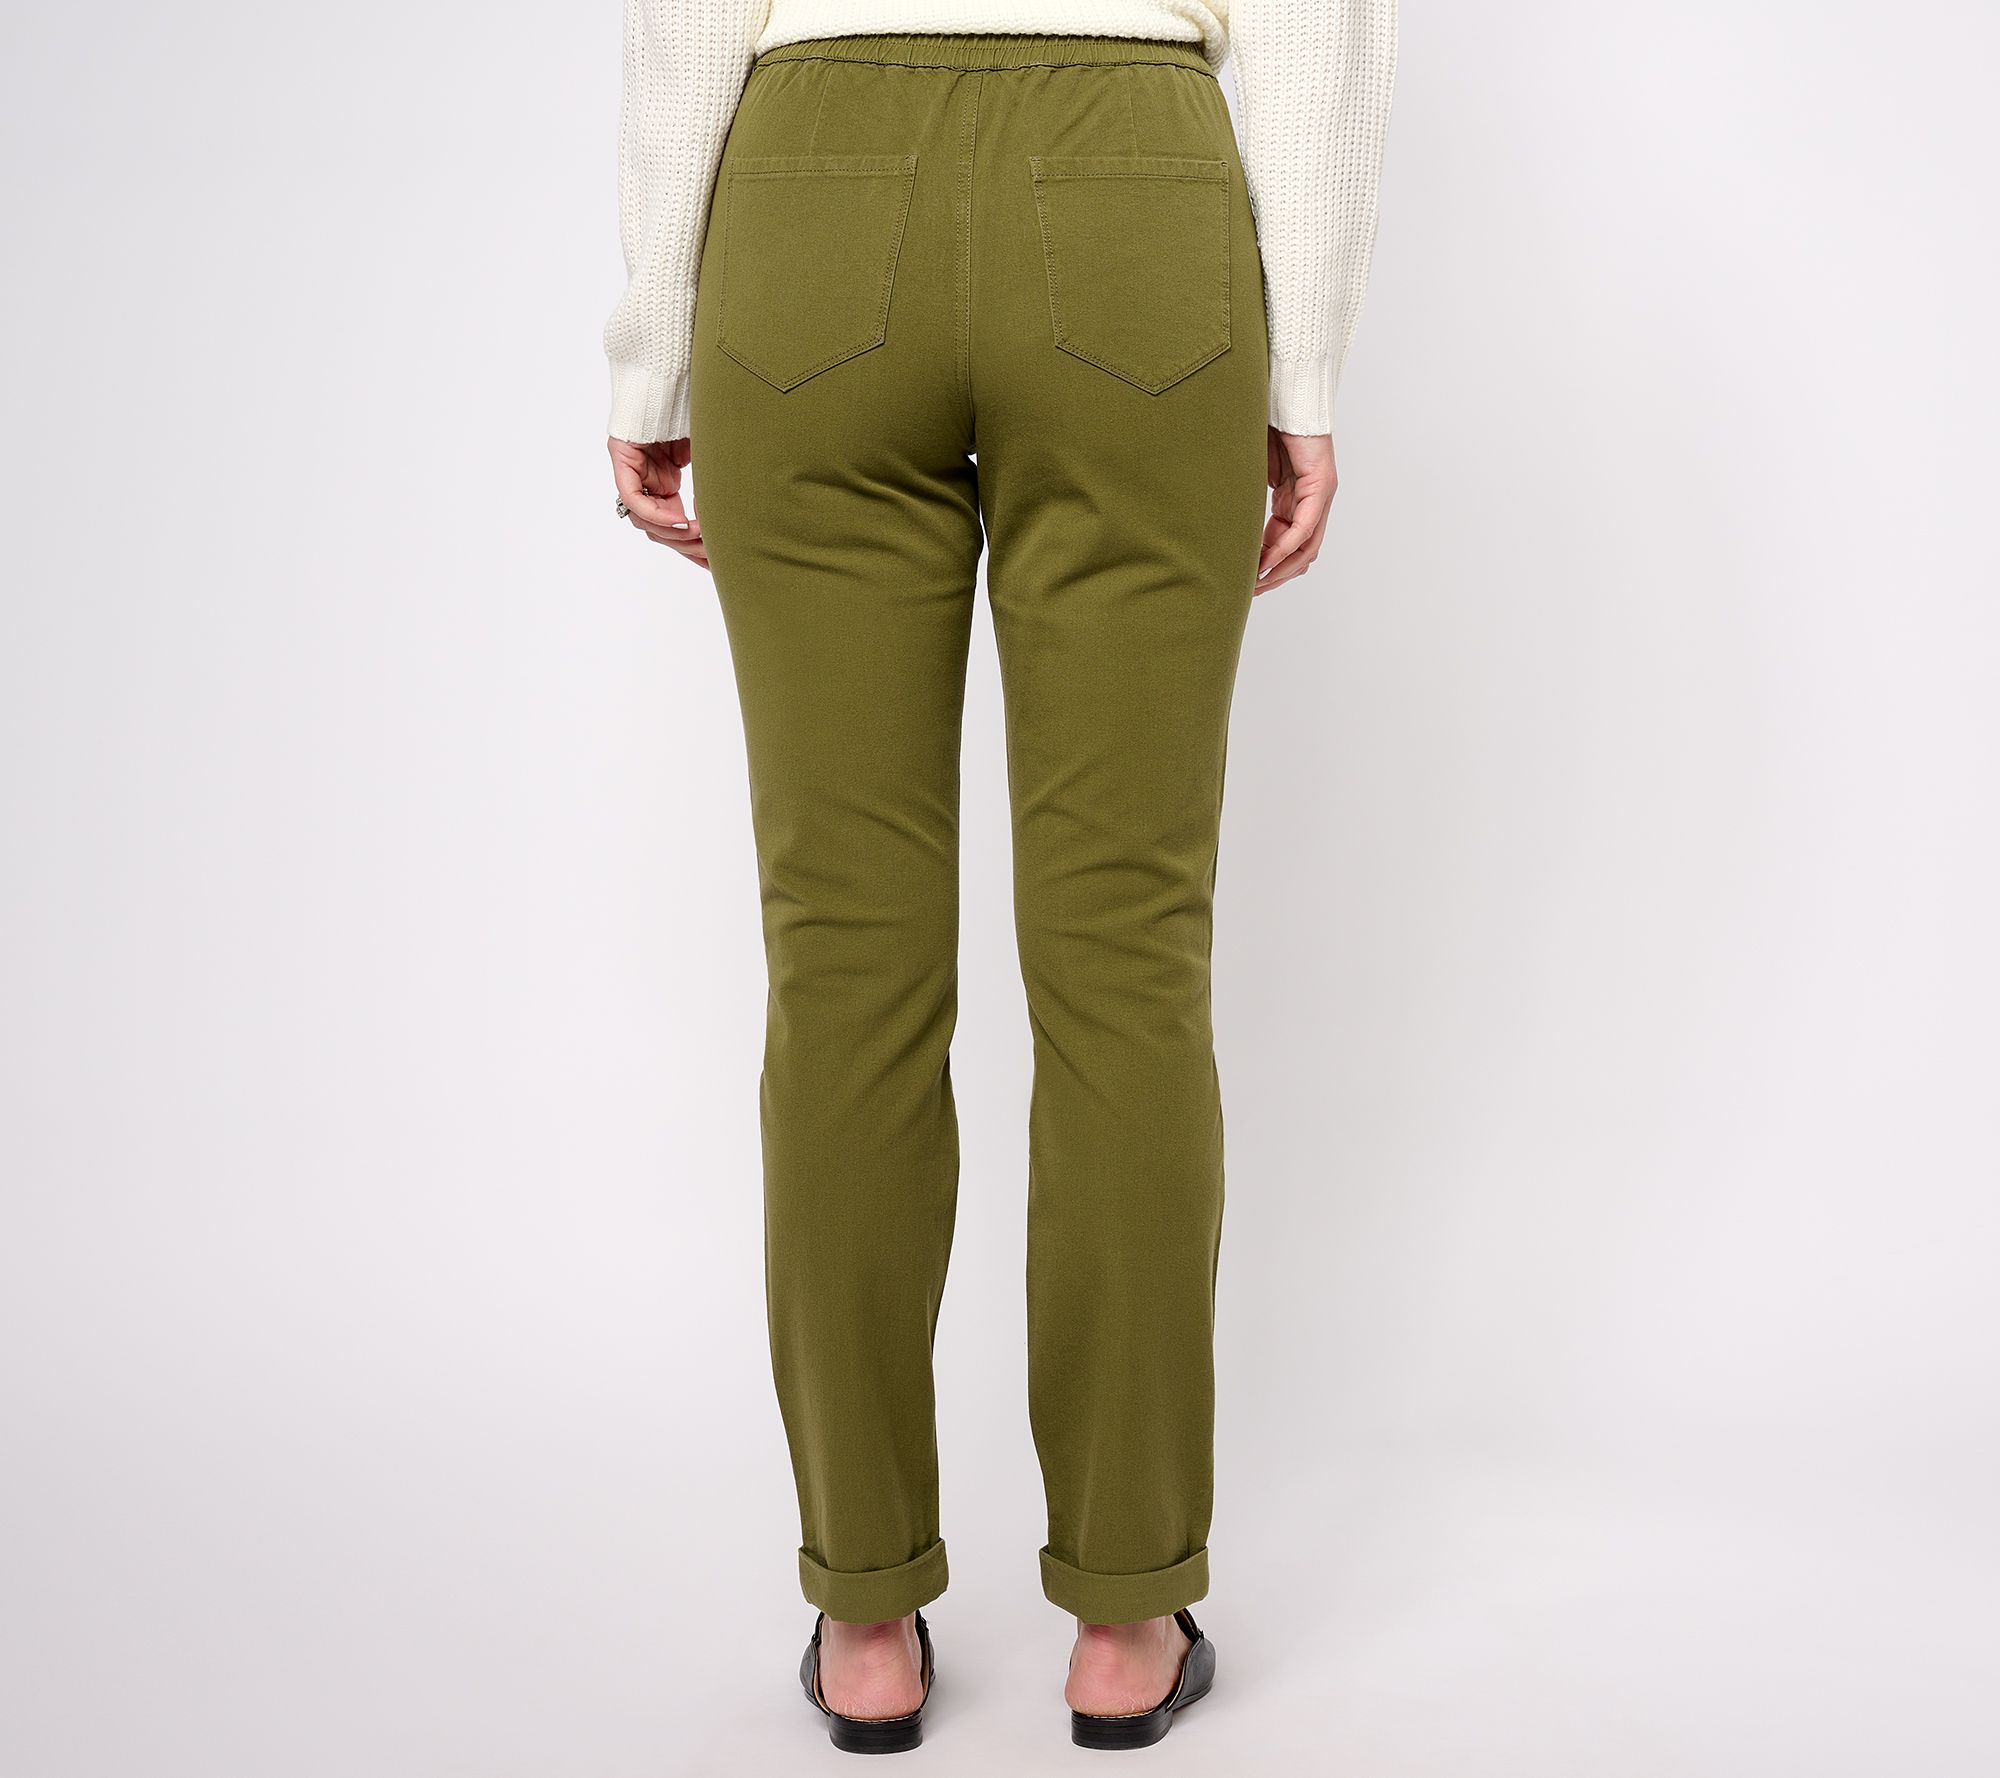 AnyBody Regular Pull-On All-Stretch Twill Pant with Pockets 